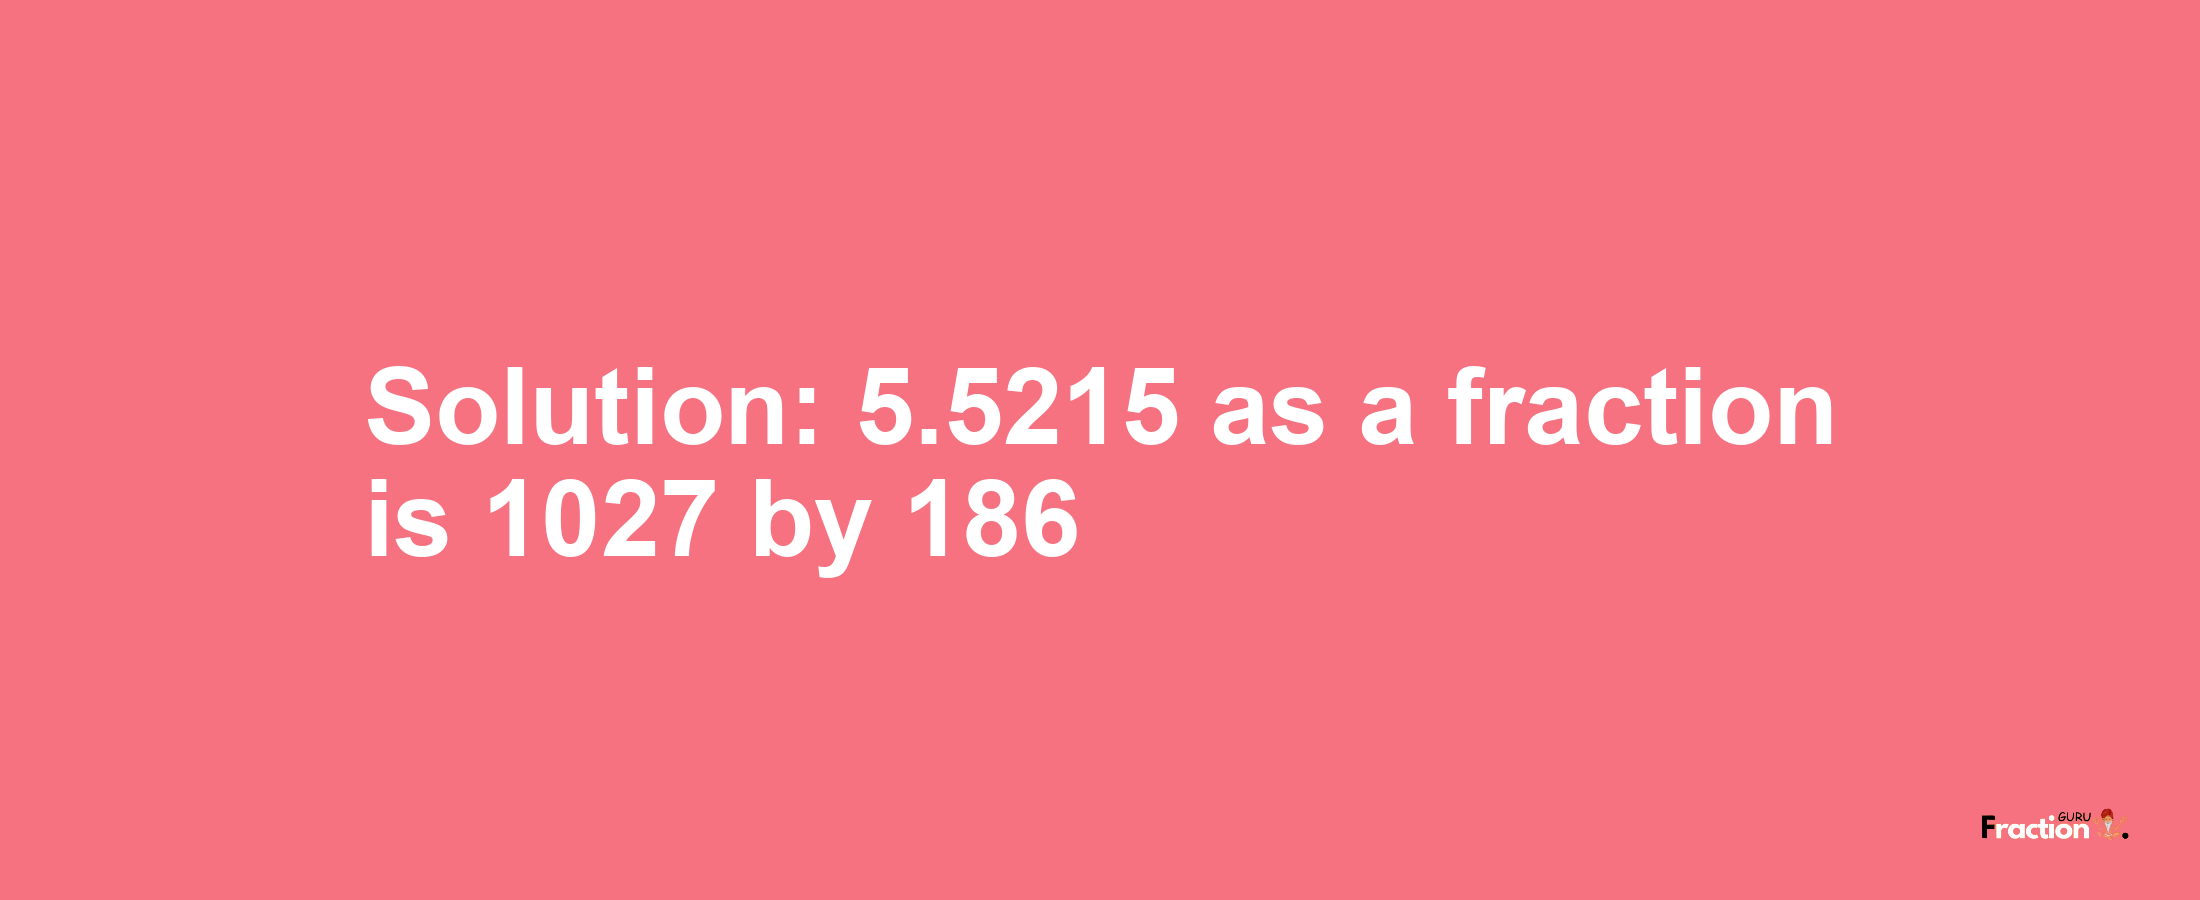 Solution:5.5215 as a fraction is 1027/186